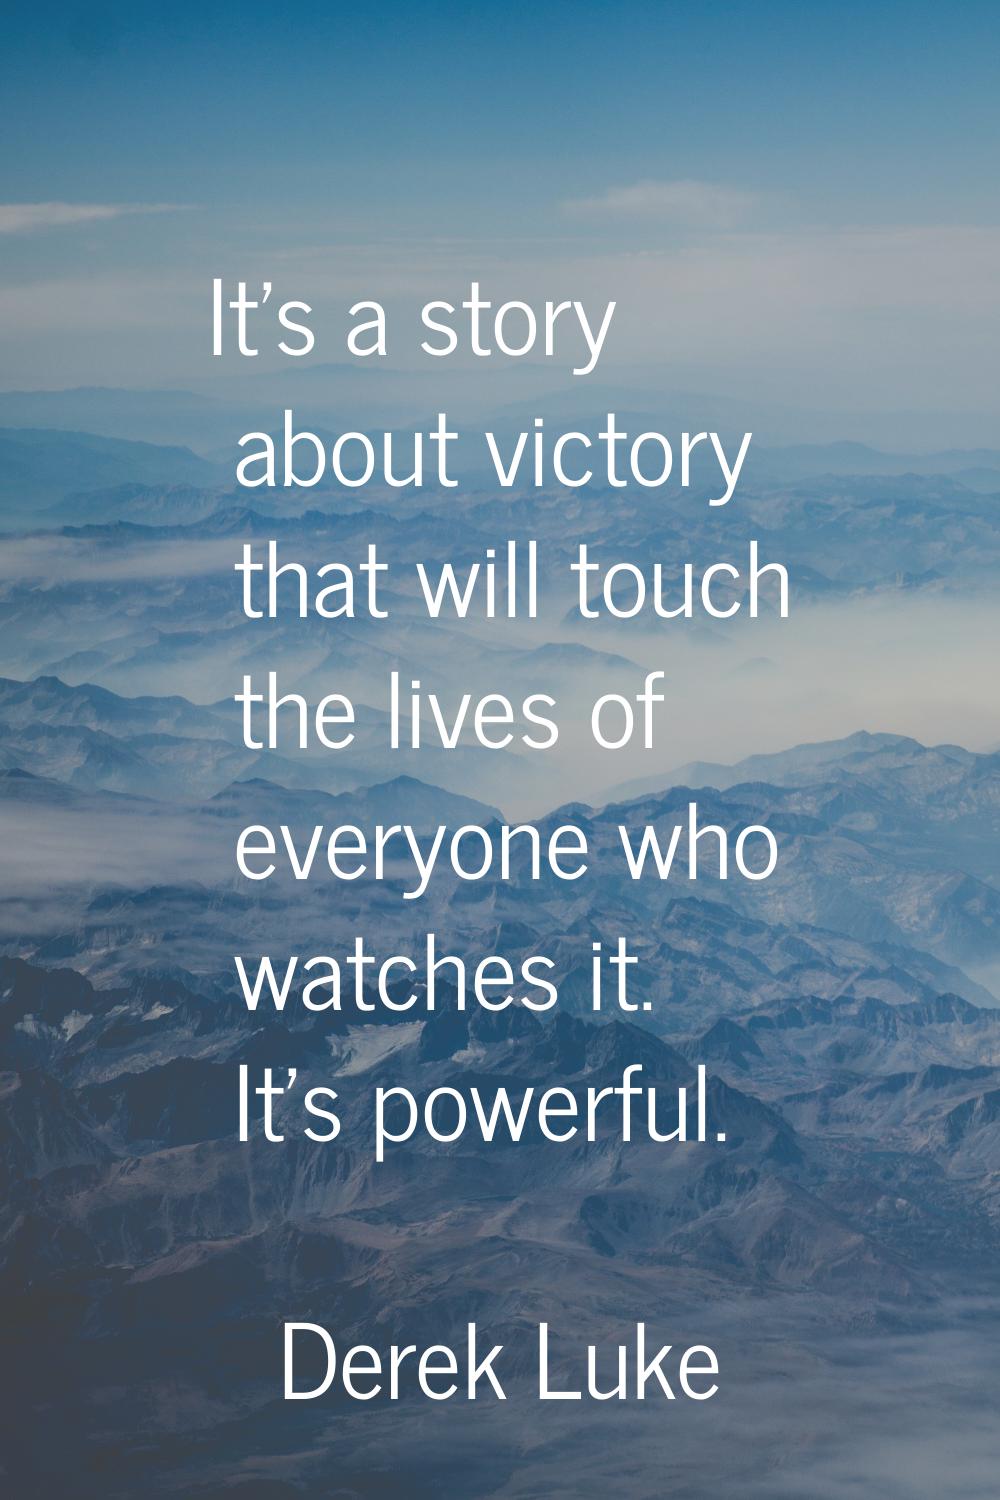 It's a story about victory that will touch the lives of everyone who watches it. It's powerful.